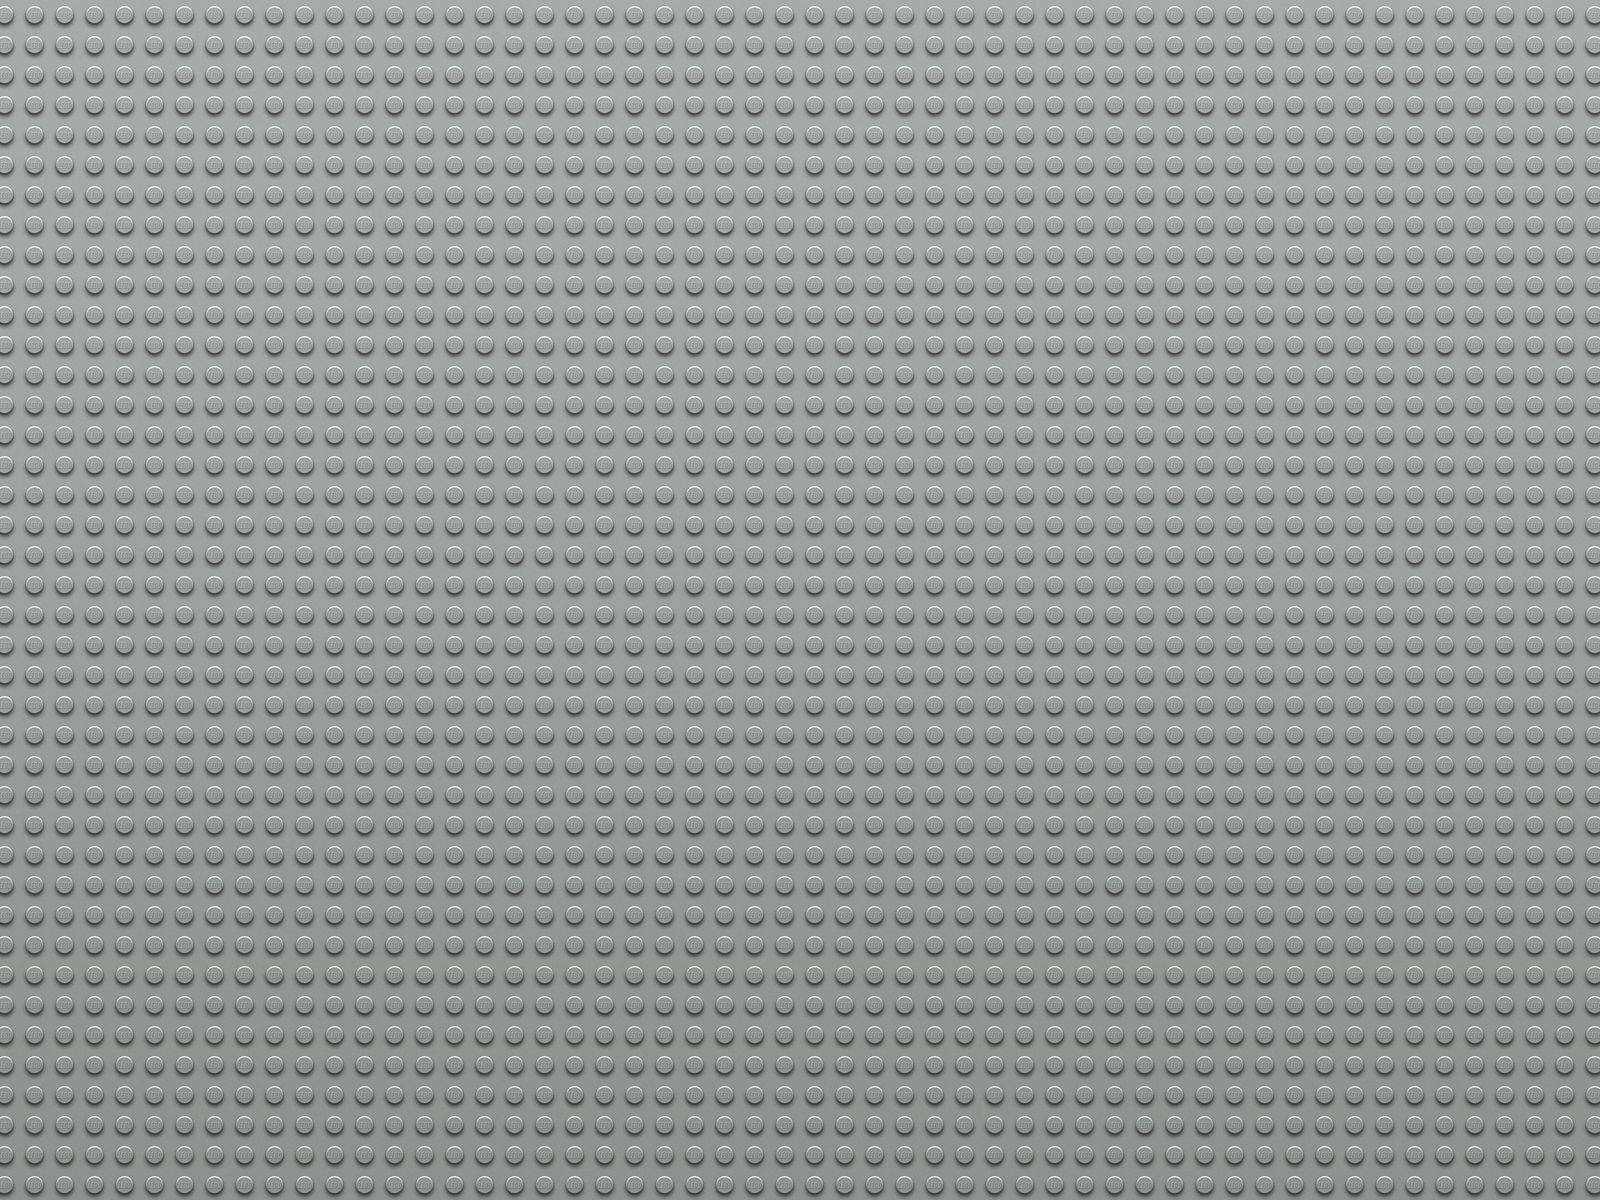 Keep Your Style Modern With Light Gray. Wallpaper